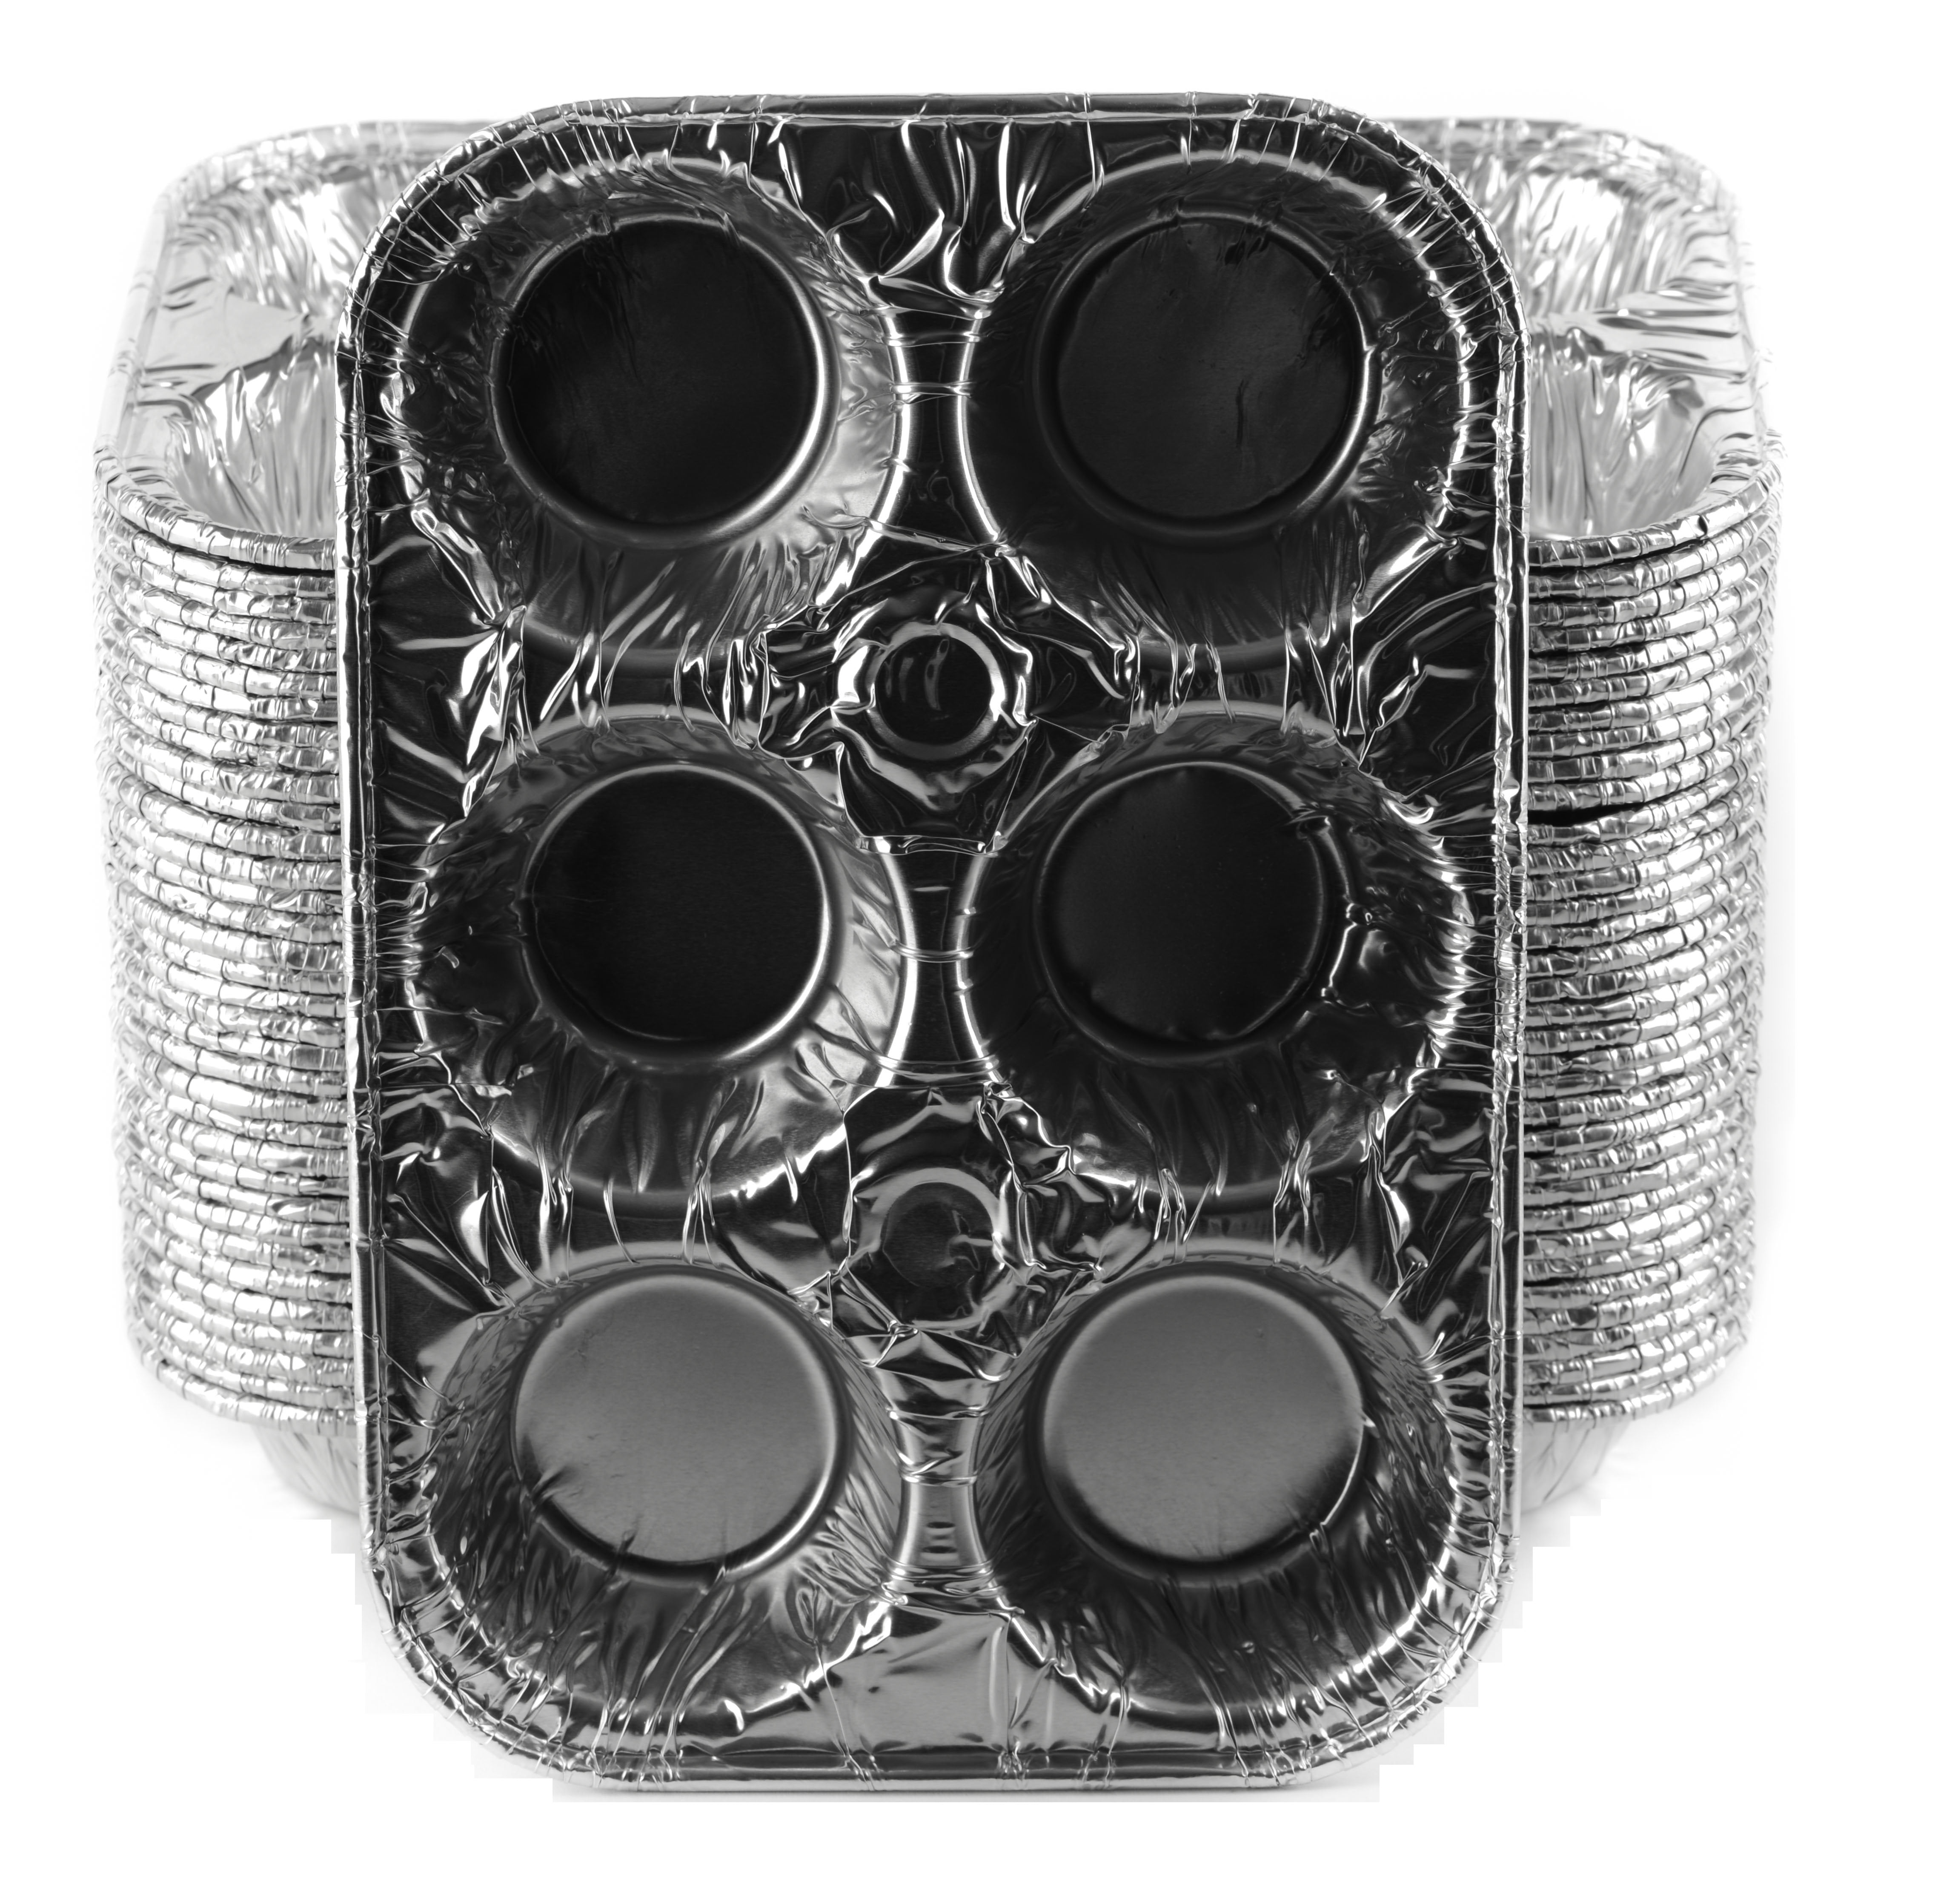 Durable 6-Cup Foil Muffin Pan 500/CS –